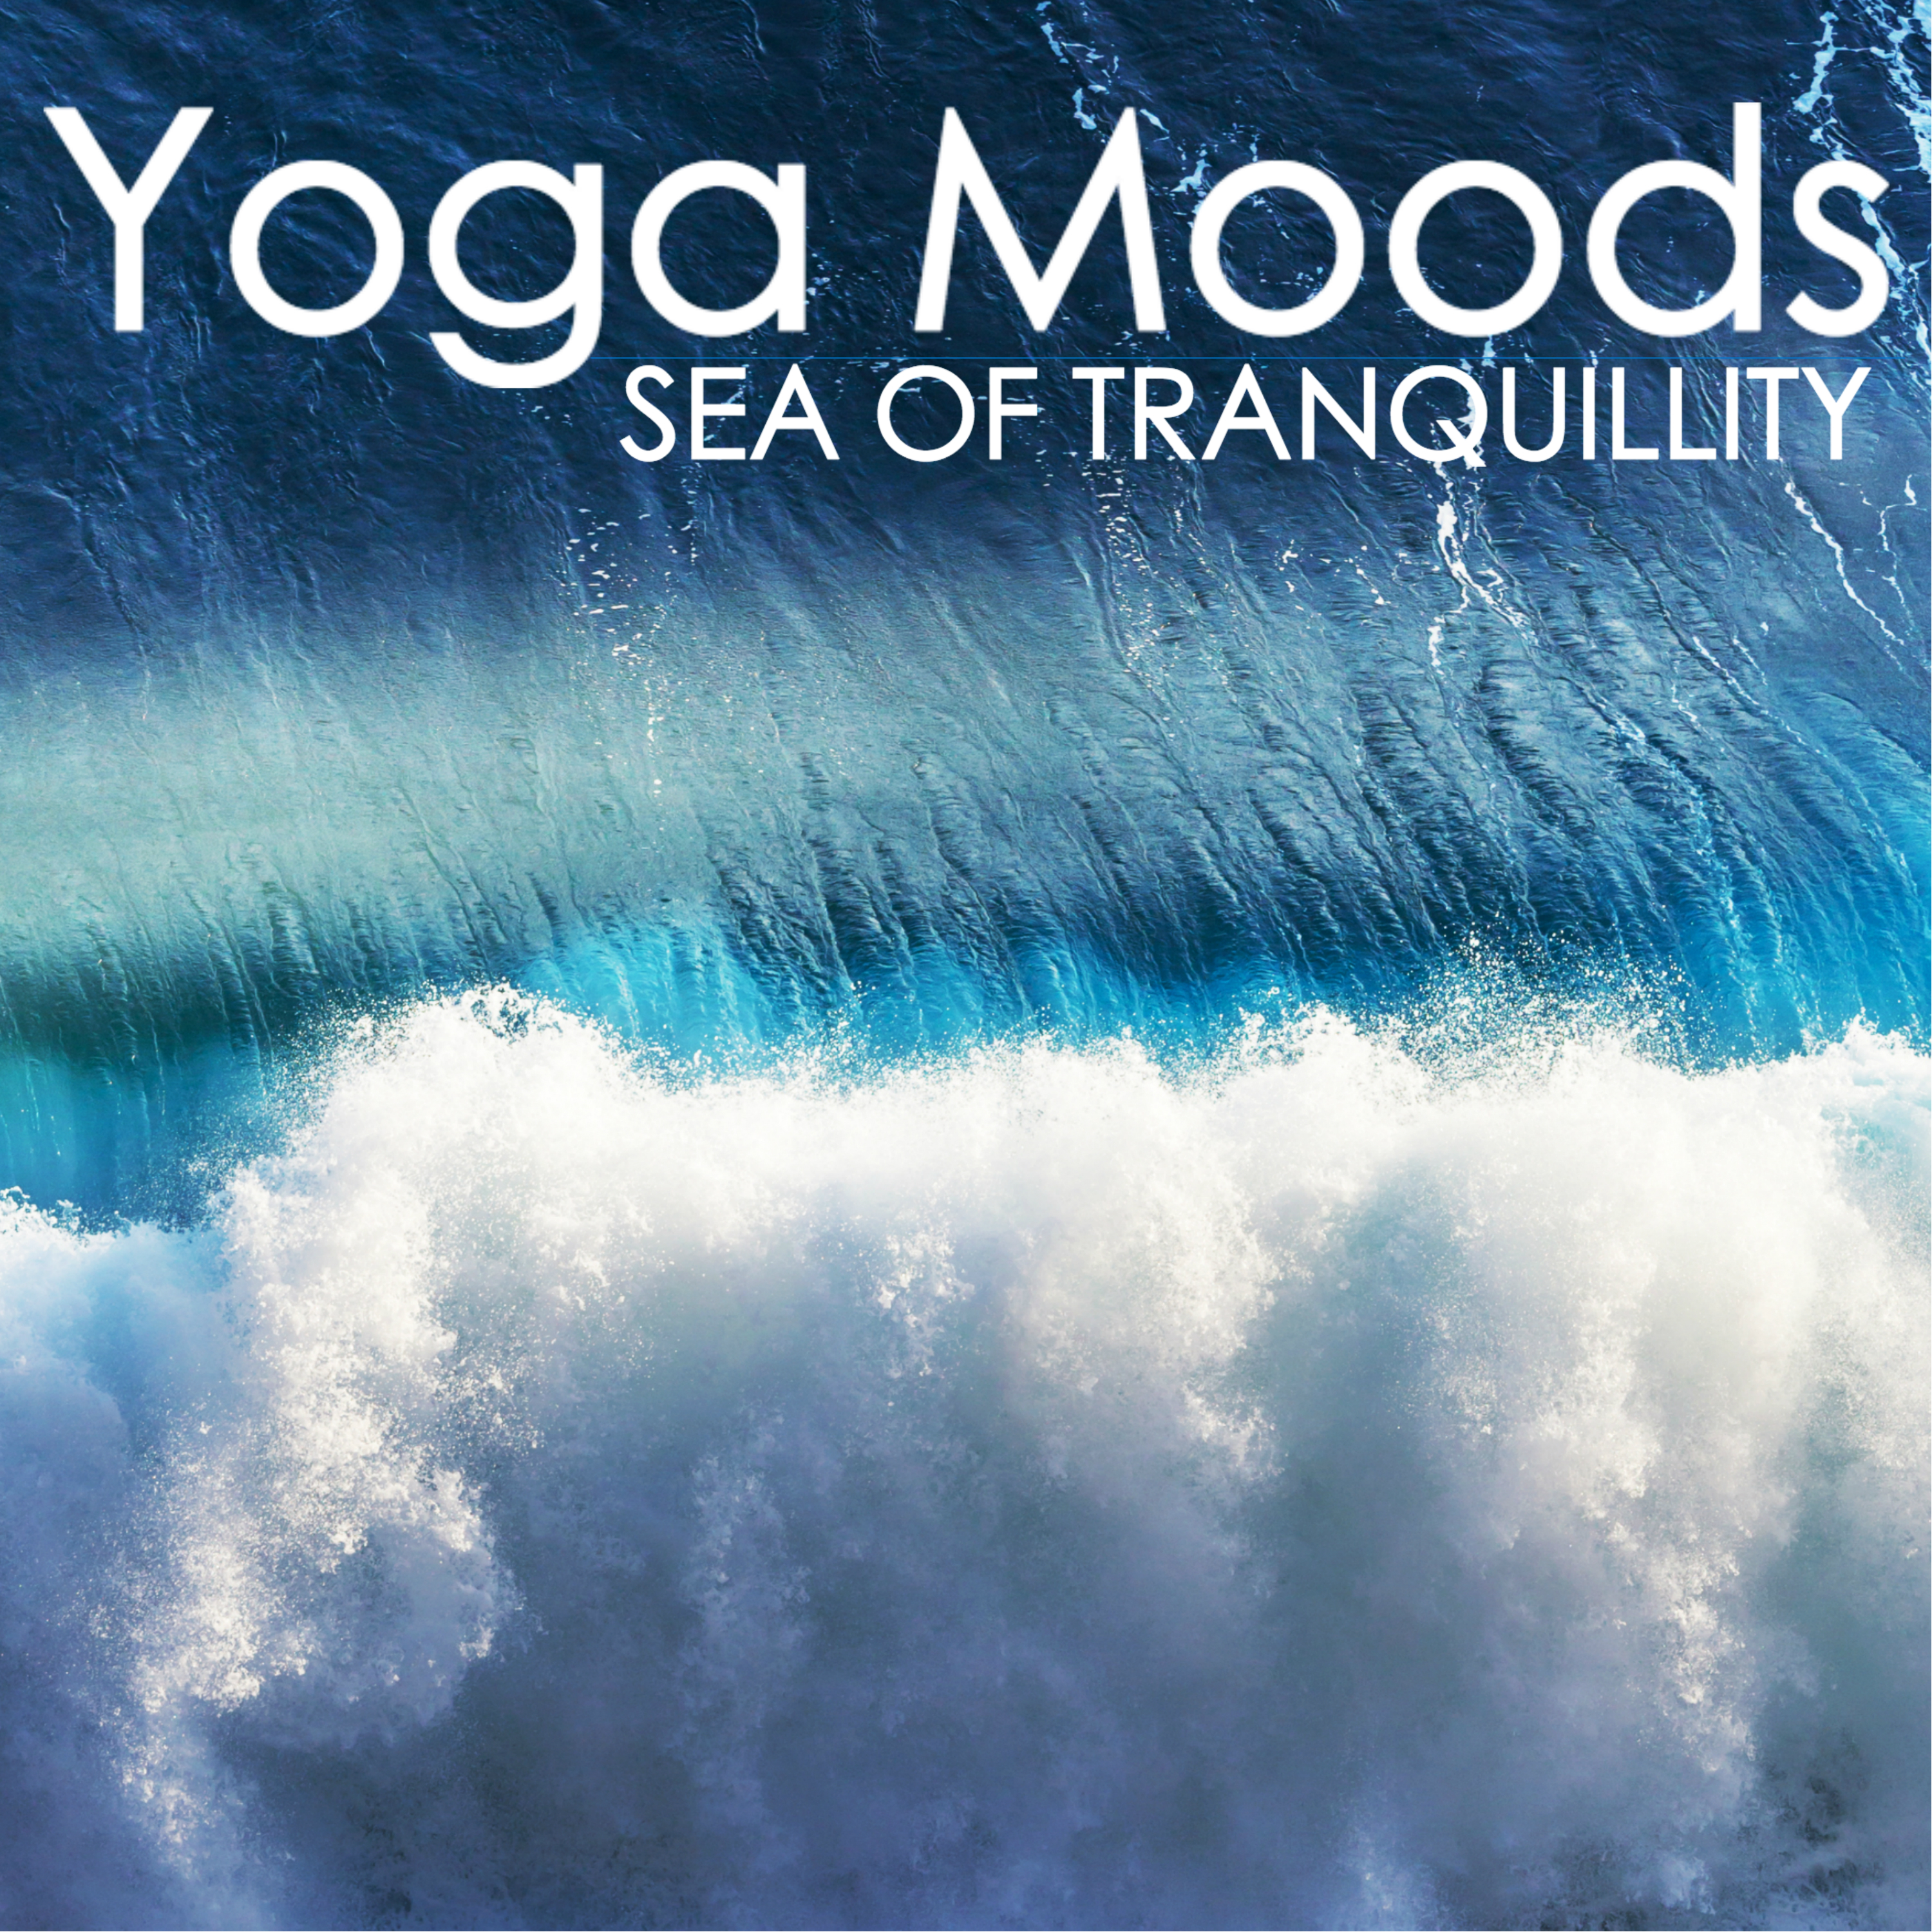 Yoga Moods - Inner Peace Sea of Tranquility, Yoga Music for Yoga Class & Routine